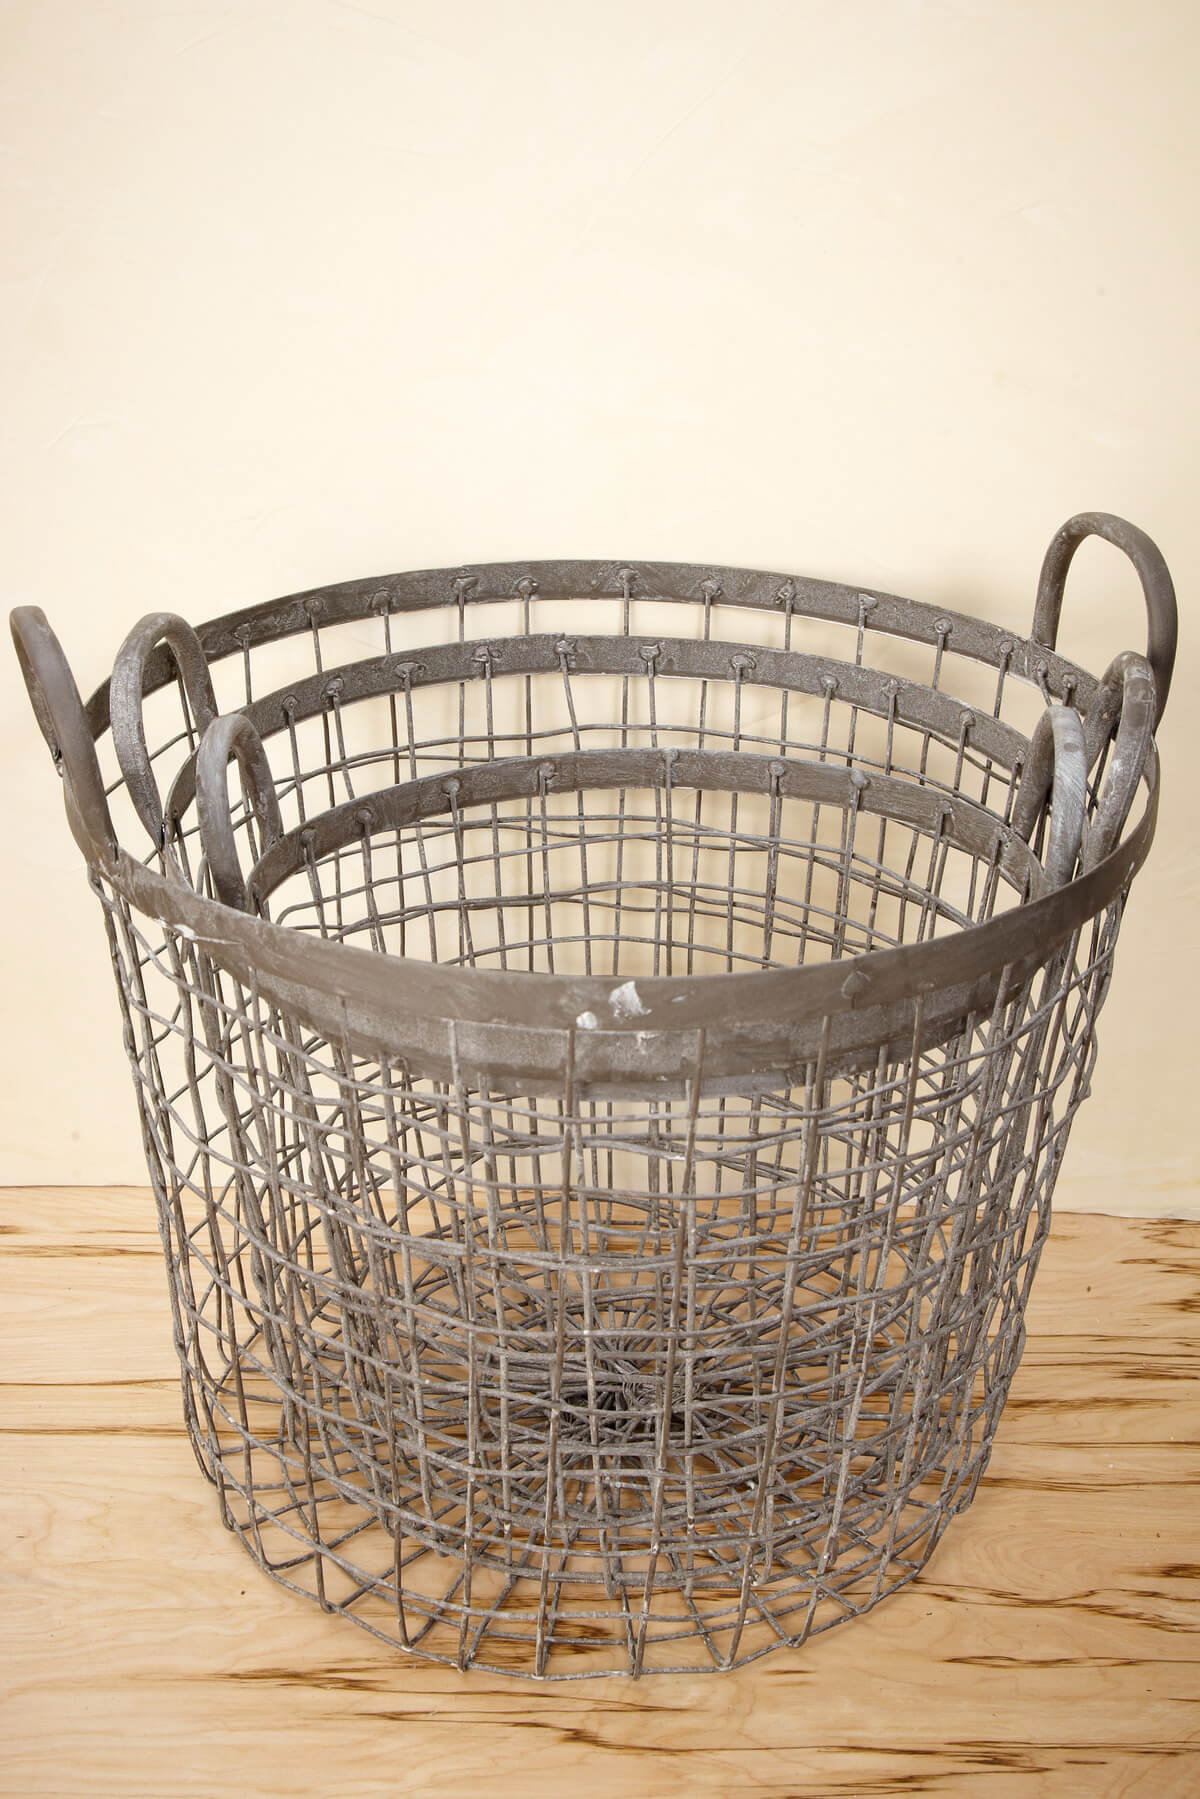 20+ Ways To Use Wire Baskets at Your Home